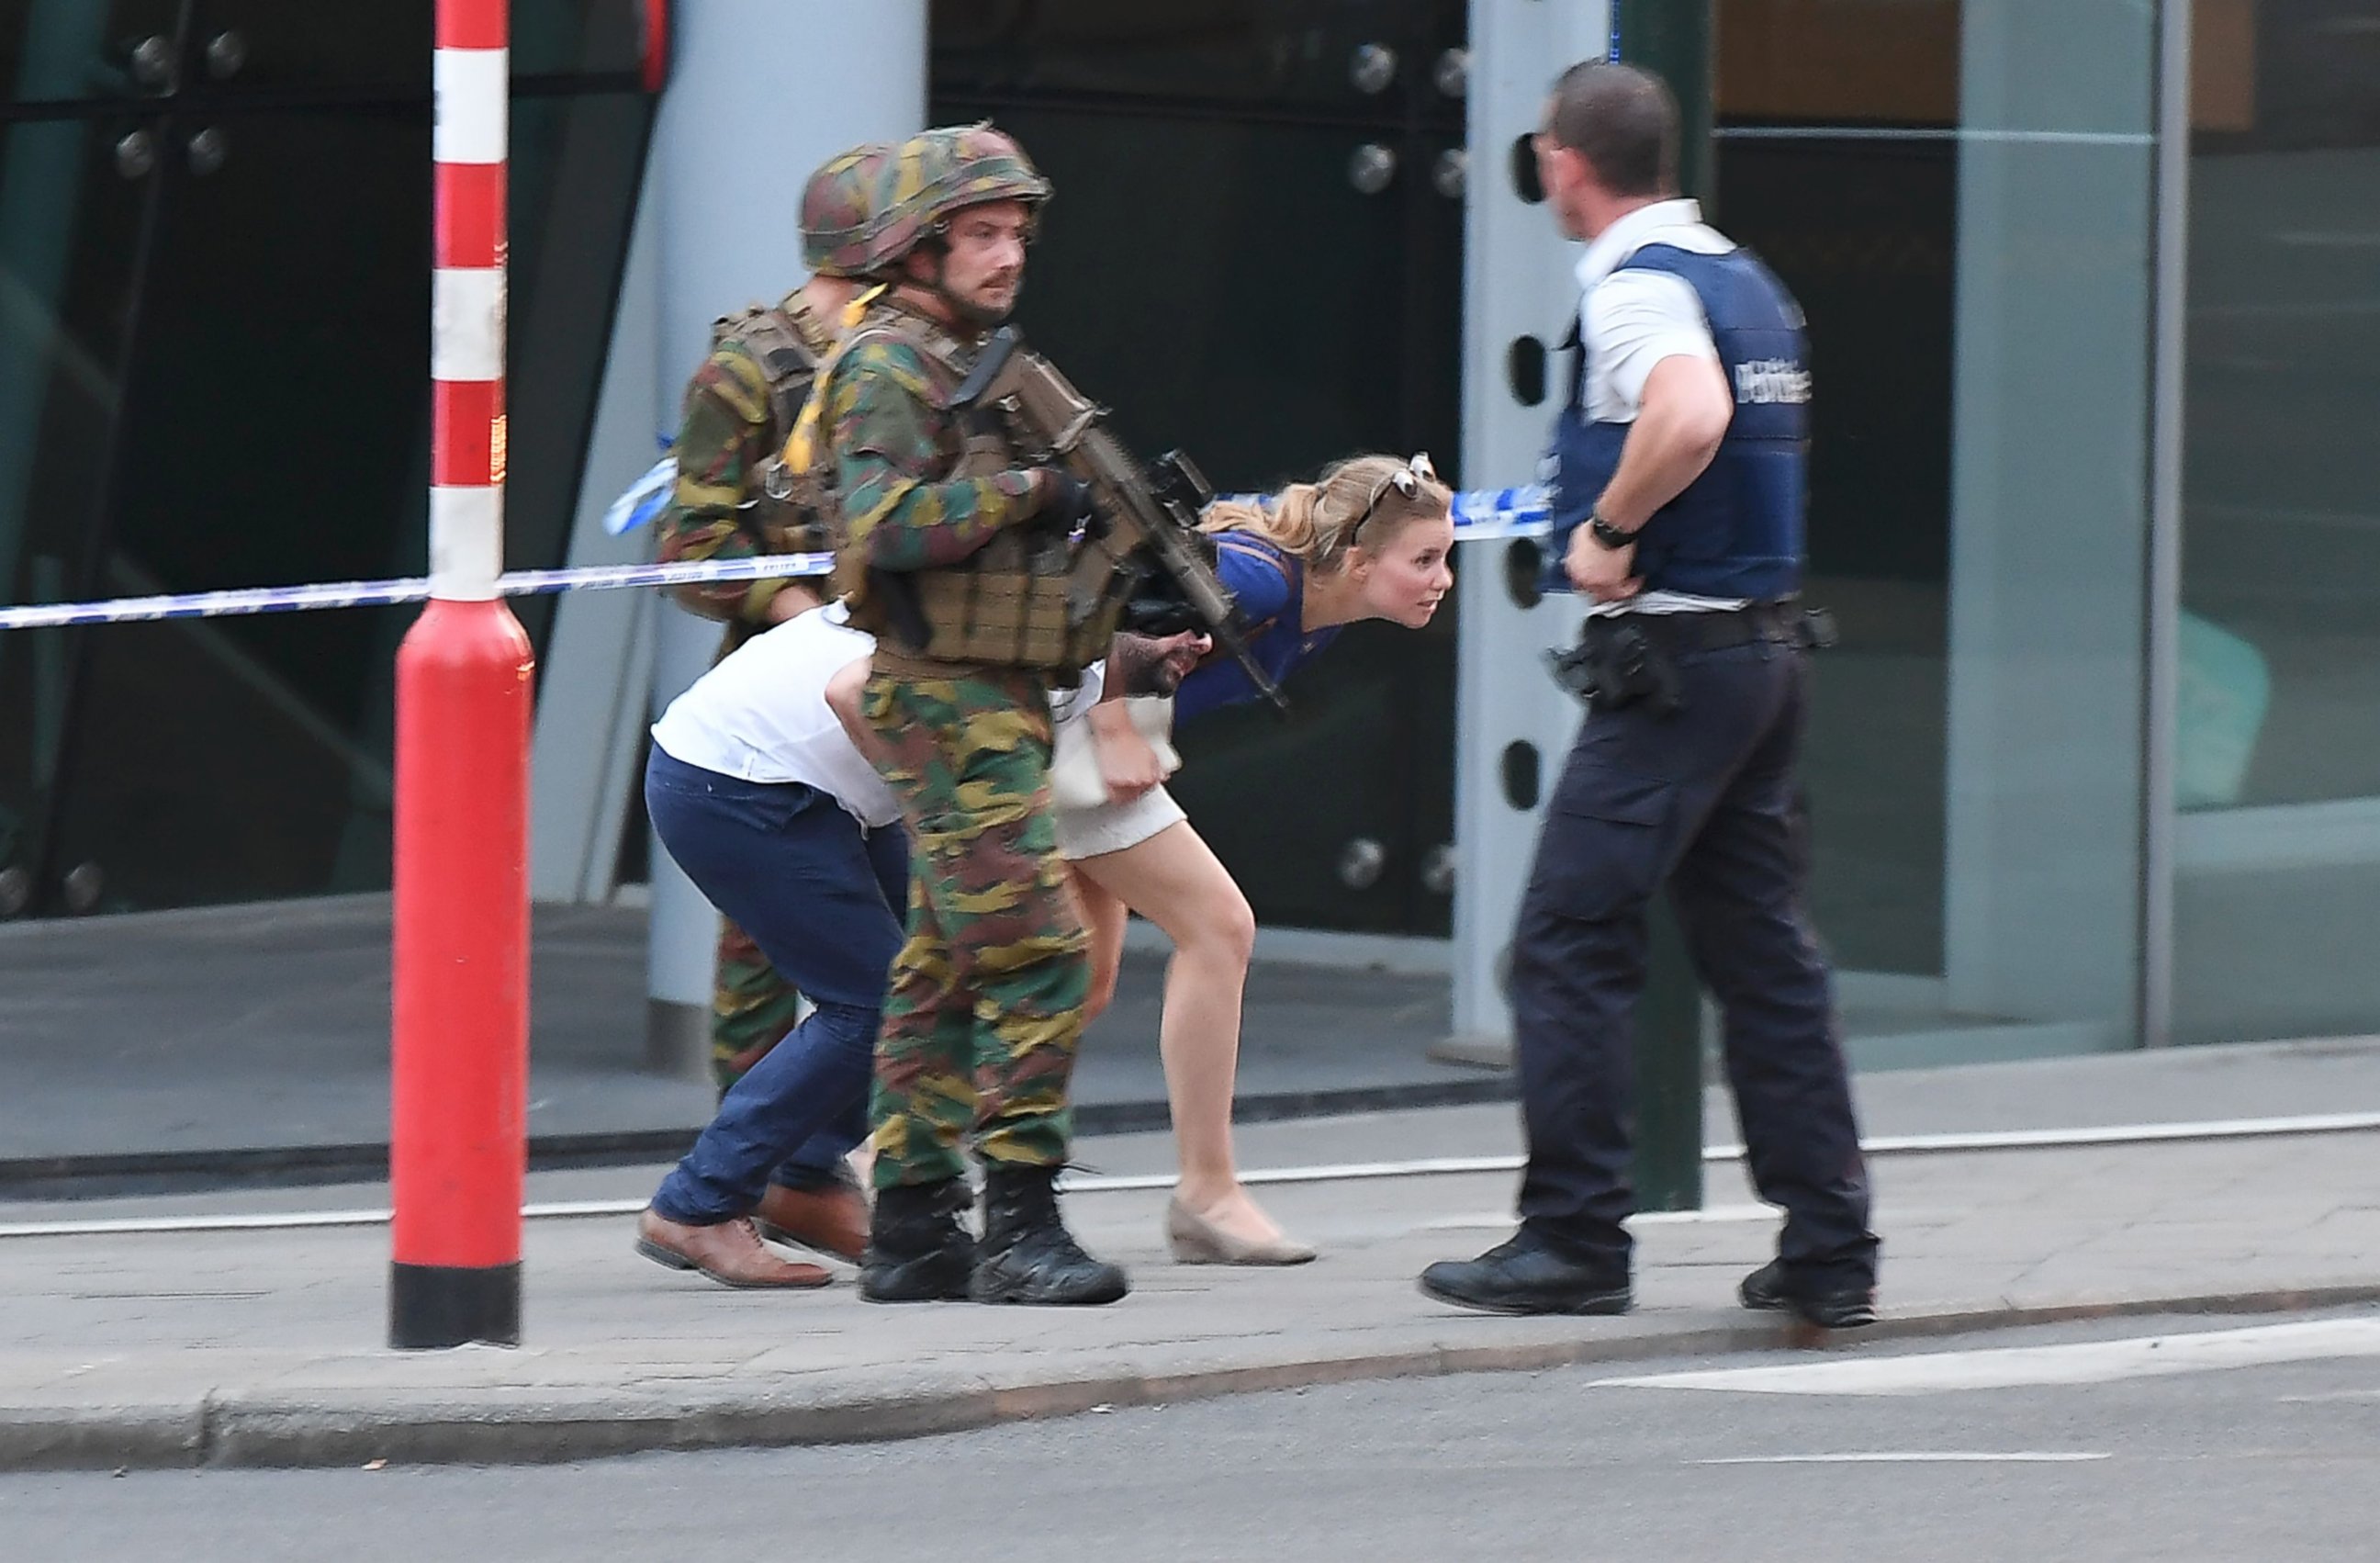 PHOTO: Soldiers and police officials guide members of the public on a street outside Gare Centrale in Brussels on June 20, 2017, after an explosion in the Belgian capital.